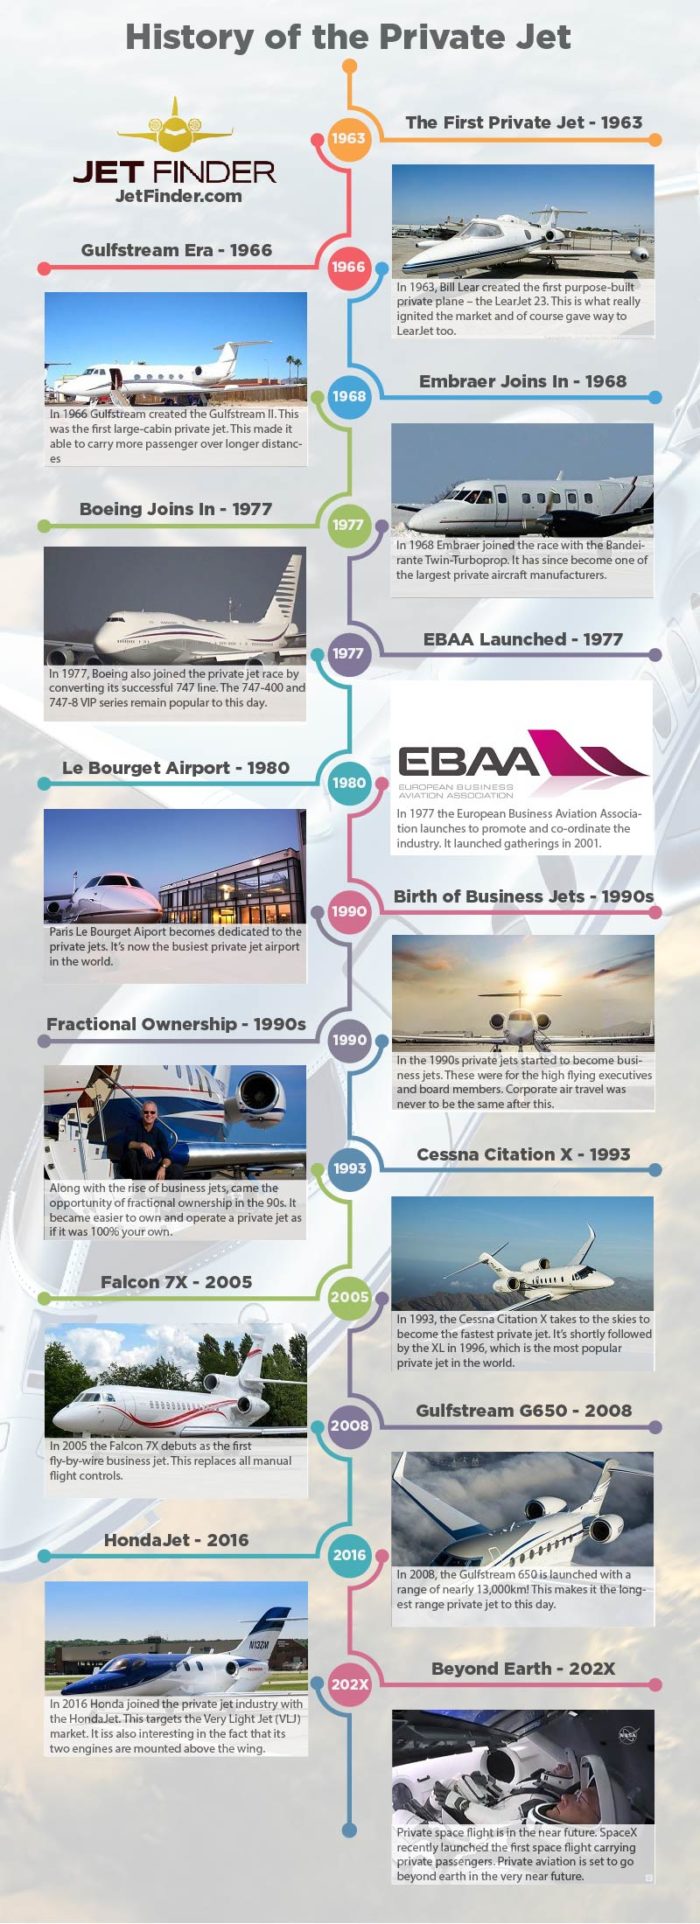 History of the Private Jet